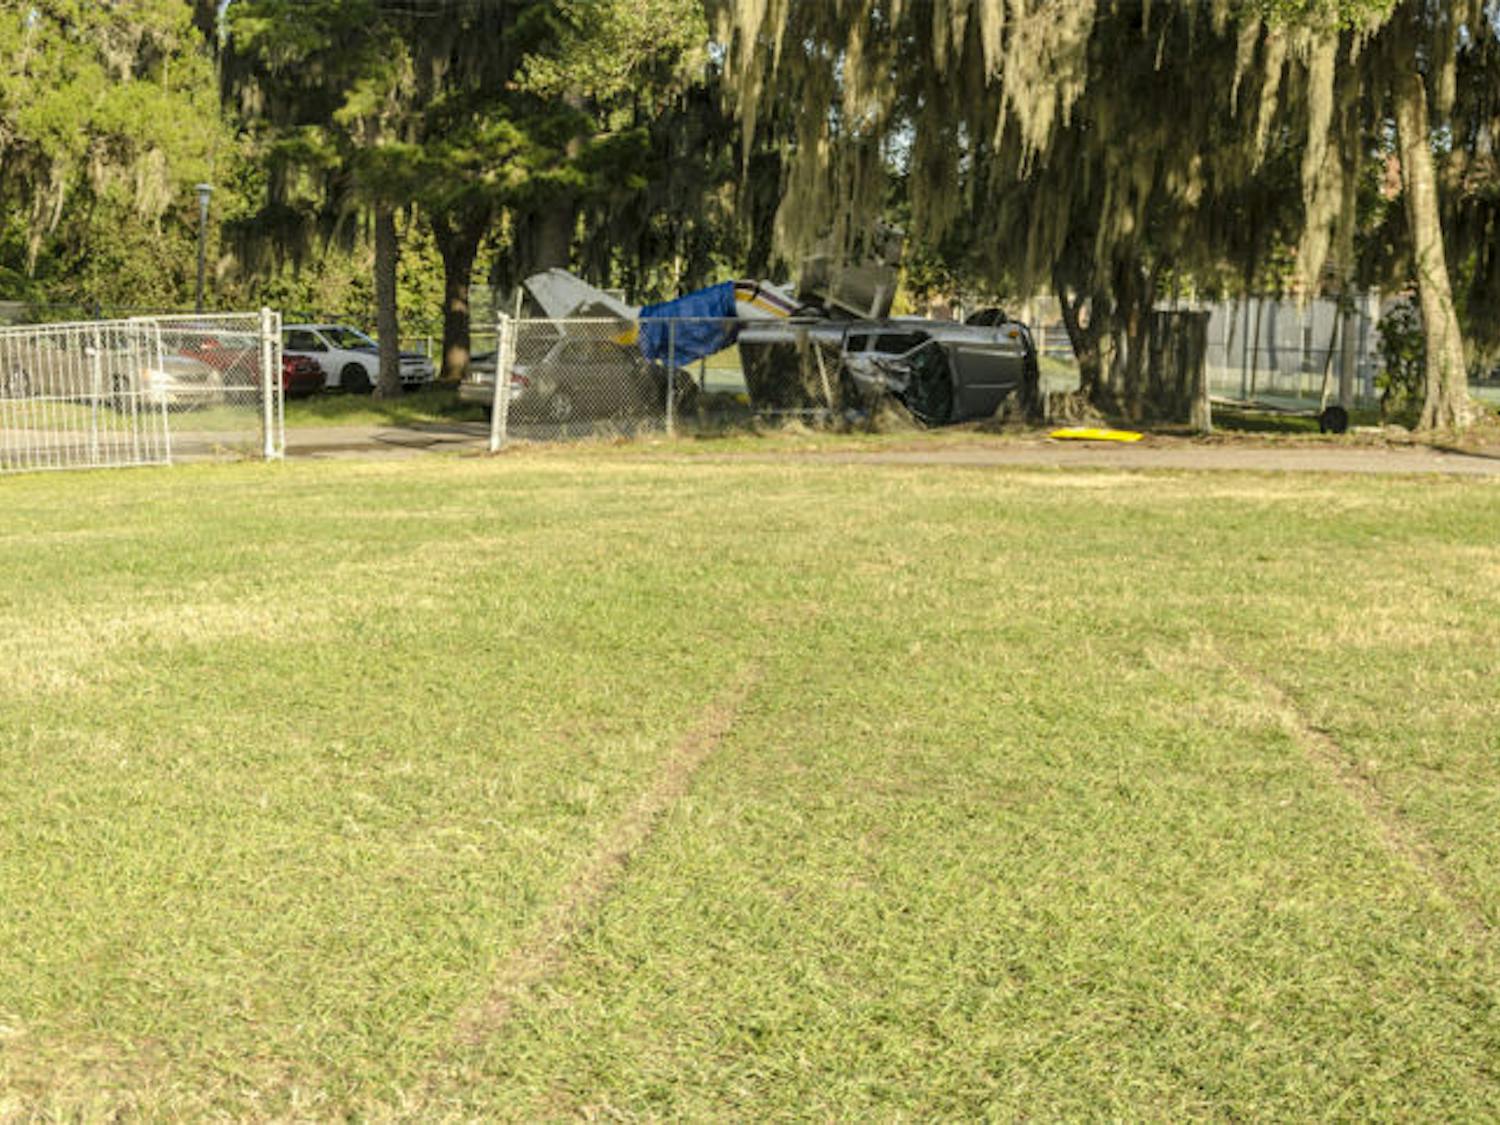 Tread marks are seen on Flavet Field on Saturday afternoon following a Cessna's emergency landing and crash.